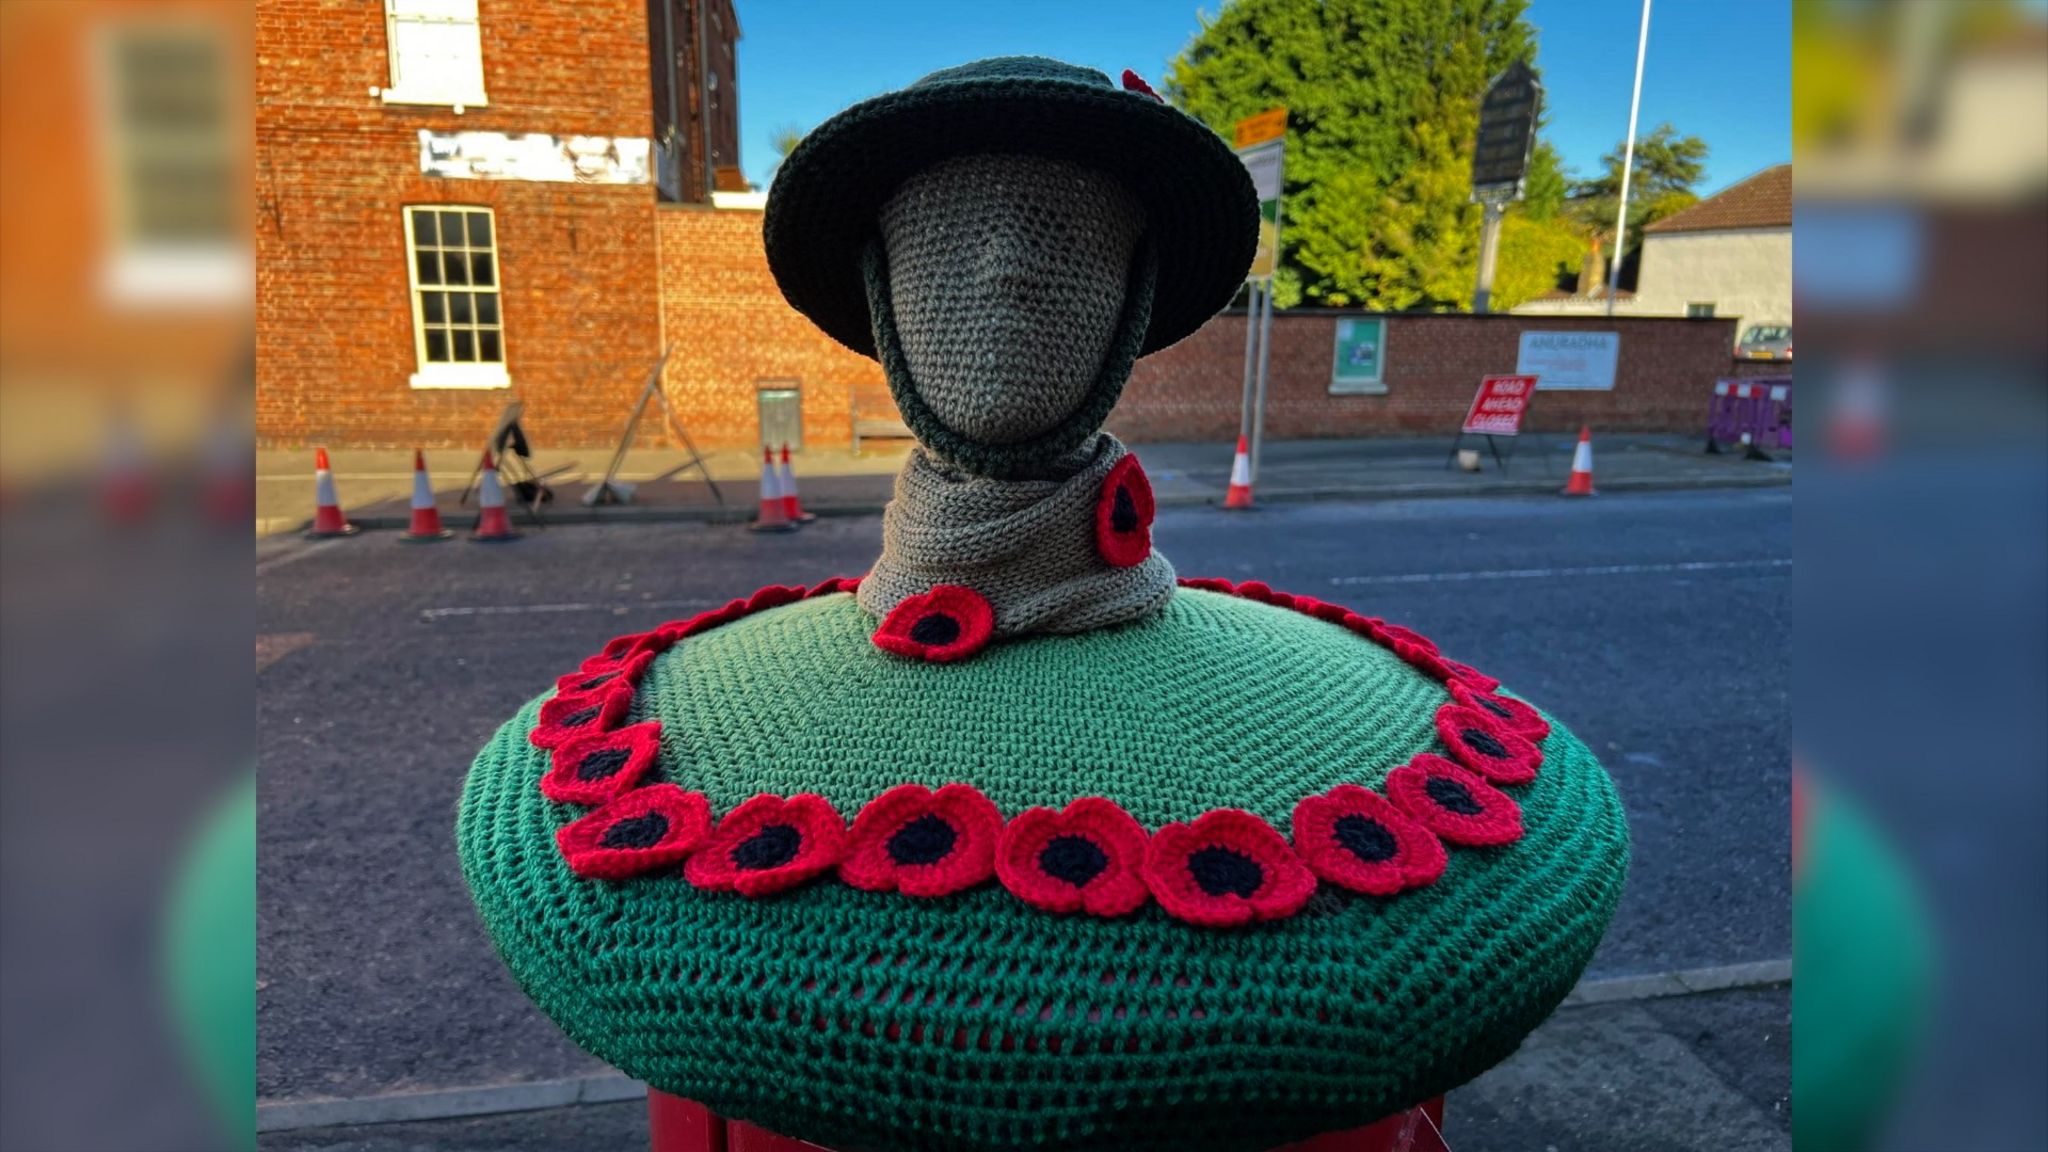 A World War One 'Tommy' is depicted in this postbox topper in Wragby, Lincolnshire.